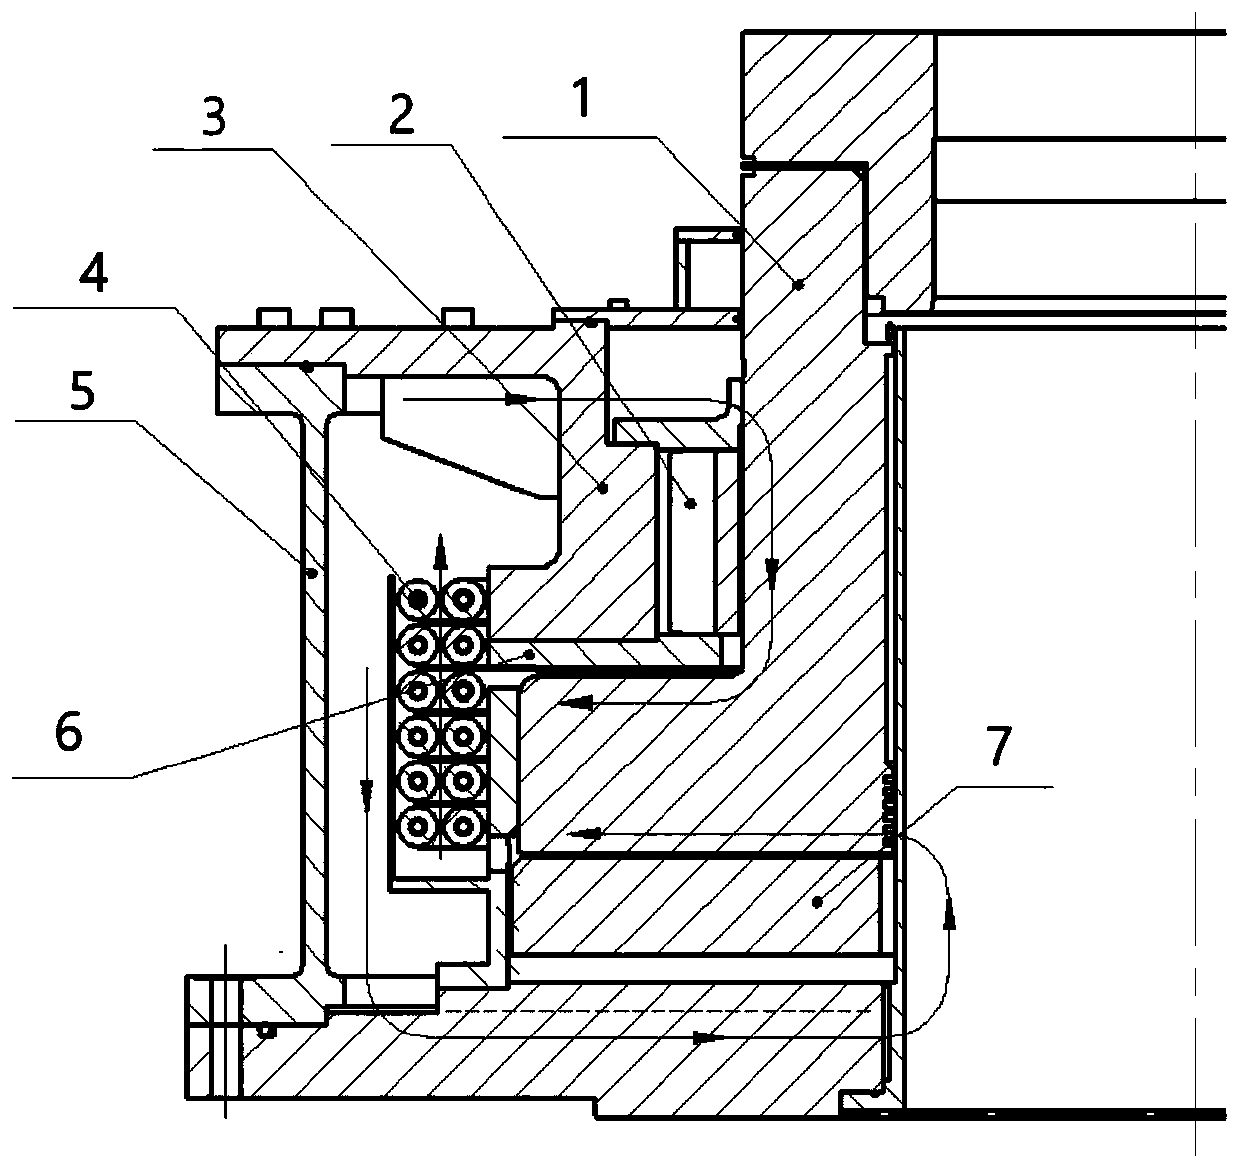 Oil way structure of sliding bearing